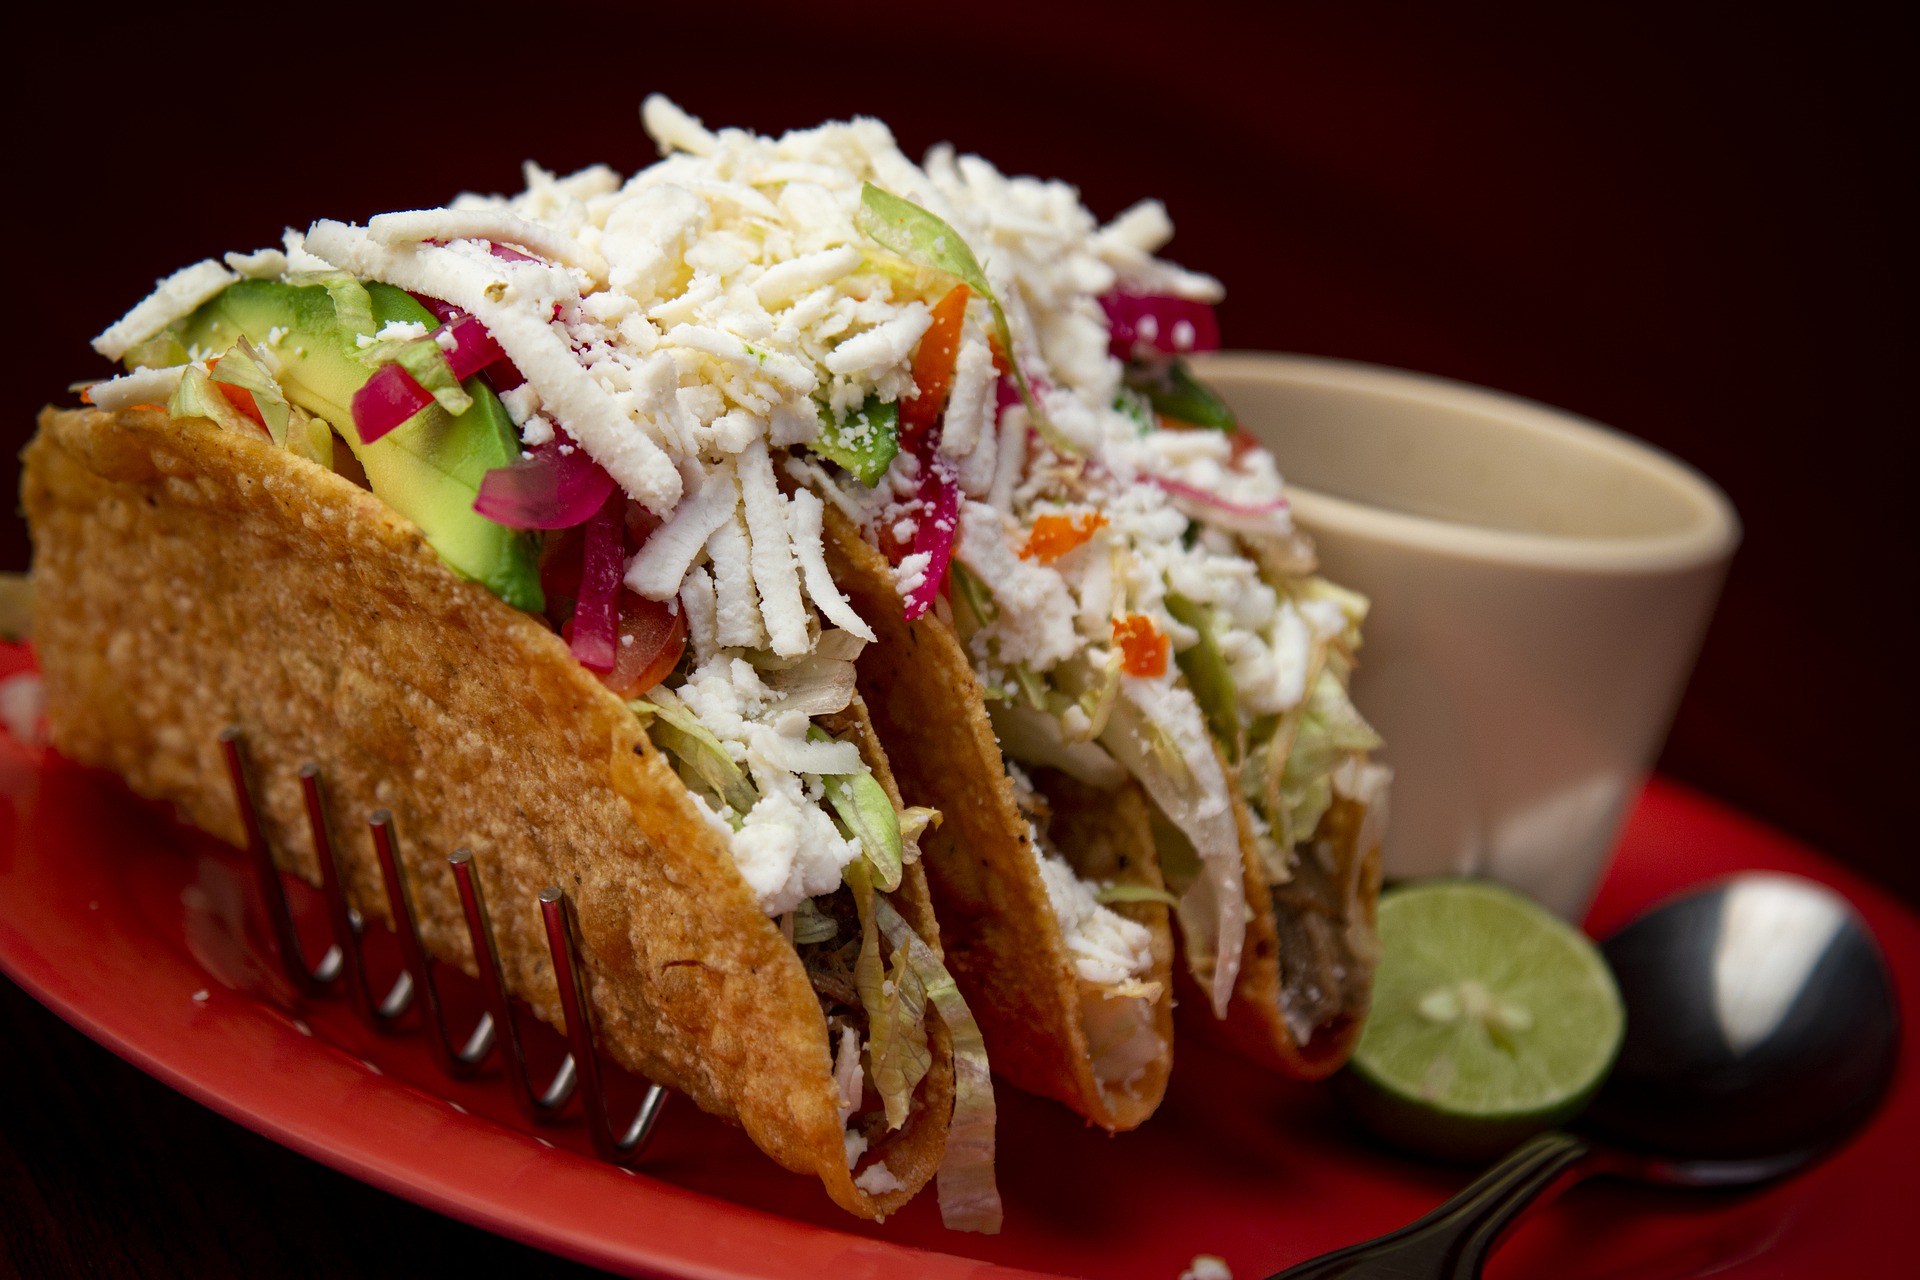 Gourmet tacos like those you can find at Los Mariachis.